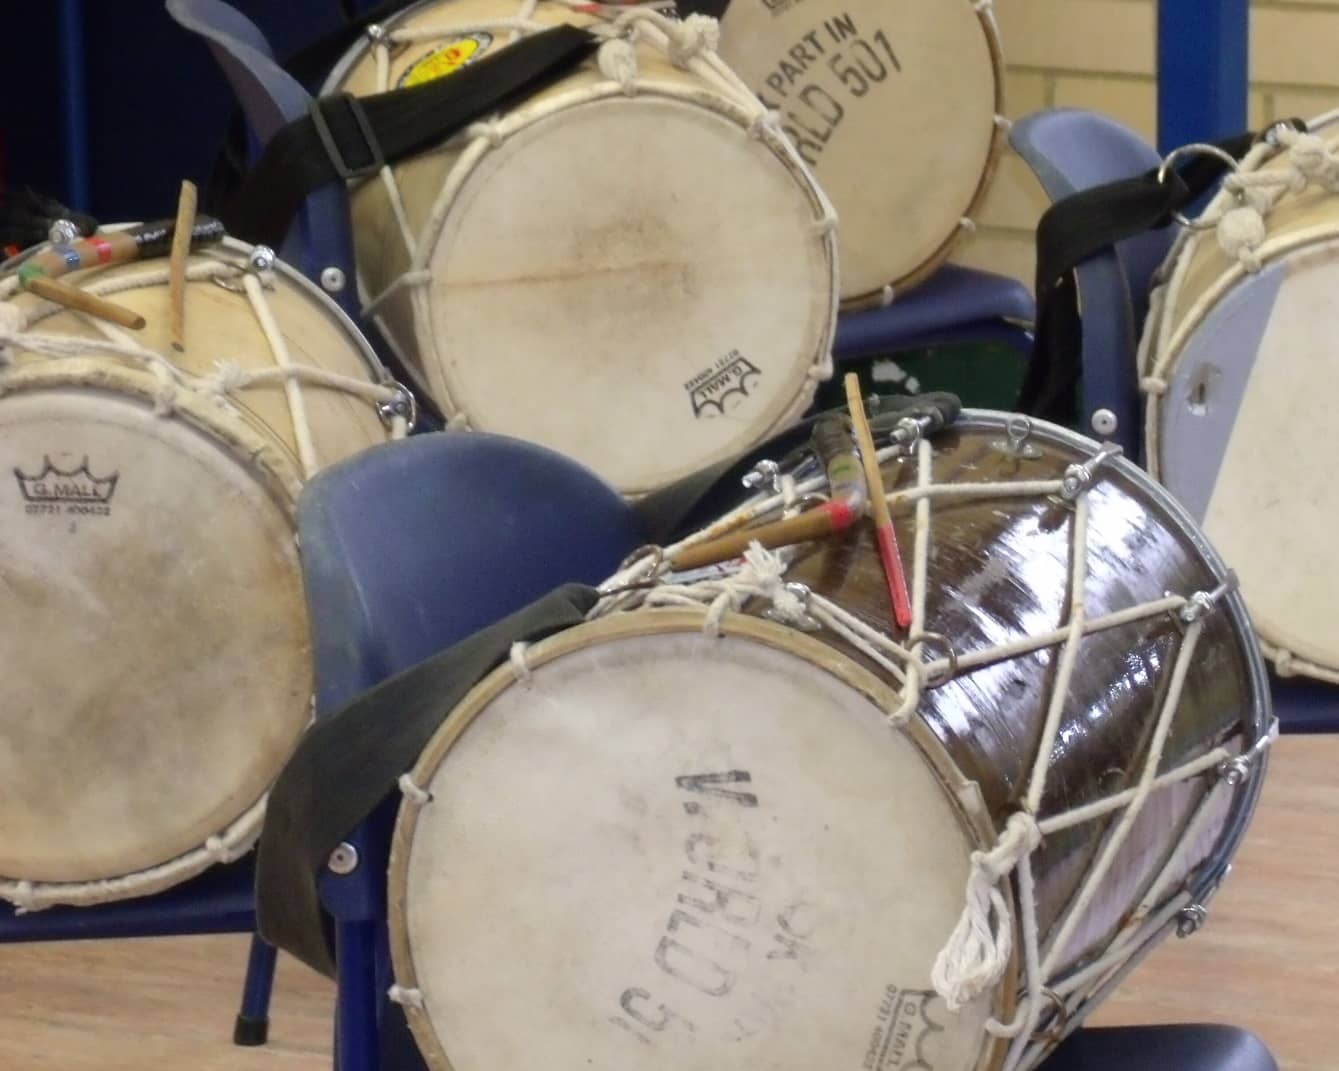 Selection of Indian drums on school chairs